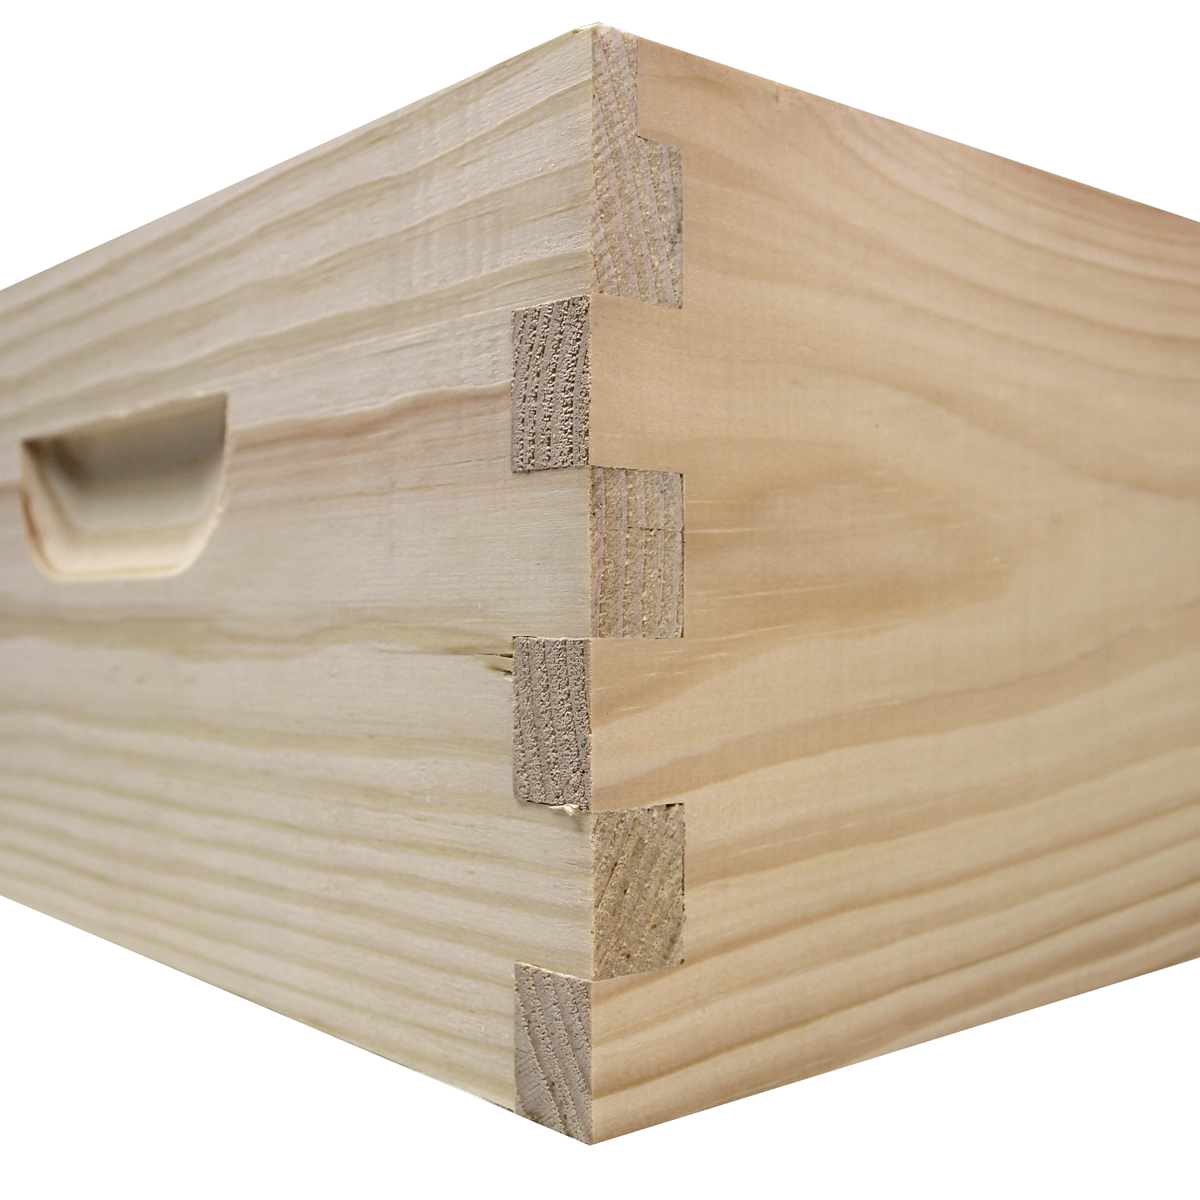 Busy Bees 'N' More Amish Made 8 Frame Medium Bee Box Uses Finger Joints